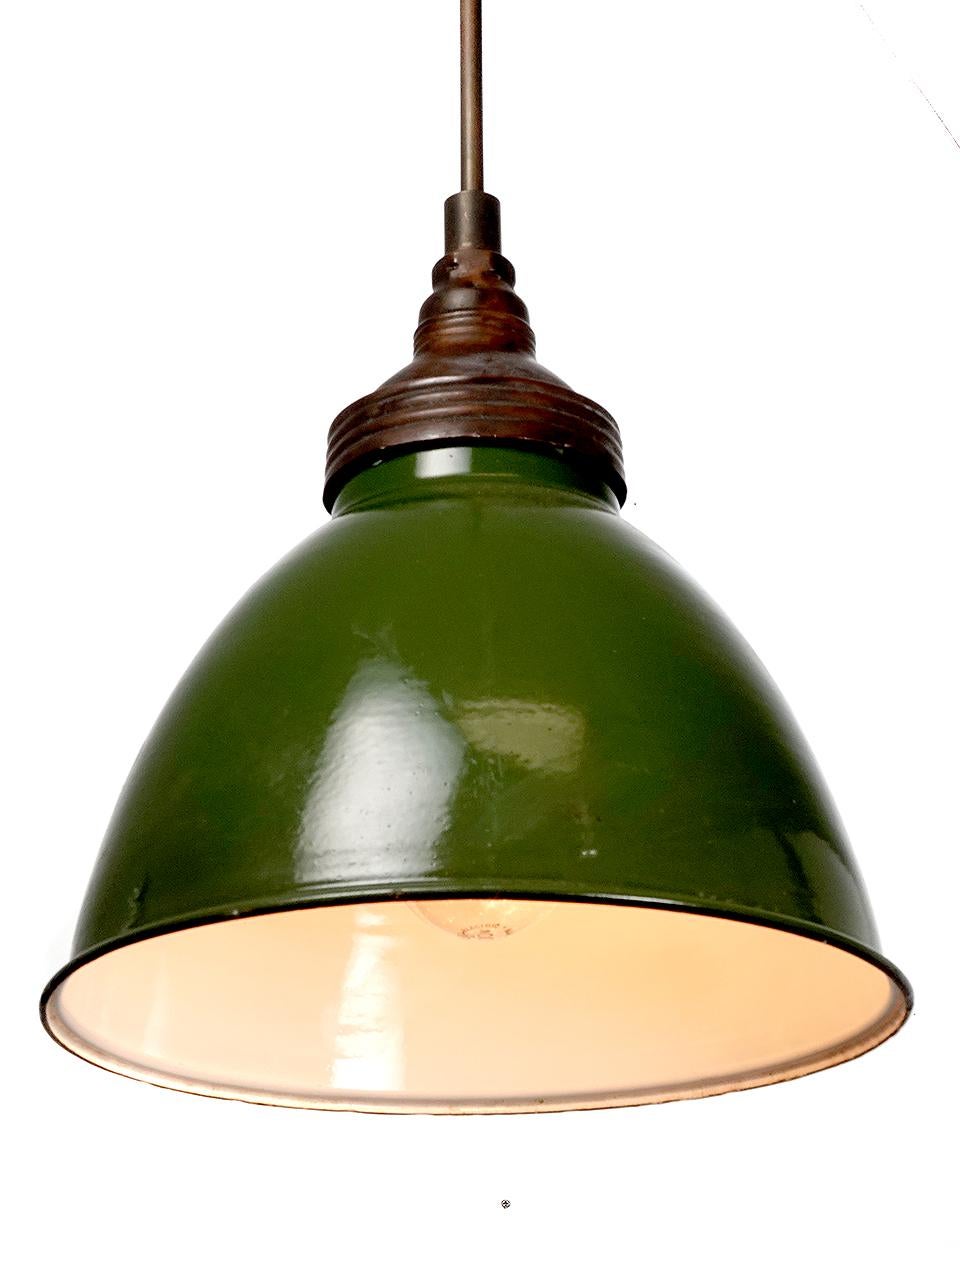 These and early simple large dome still feel contemporary after 75 years. The shade has a baked on finish with a small age or wear mark here and here. The top is dark copper and finish gives the dome its unique look. We have a few in stock and they